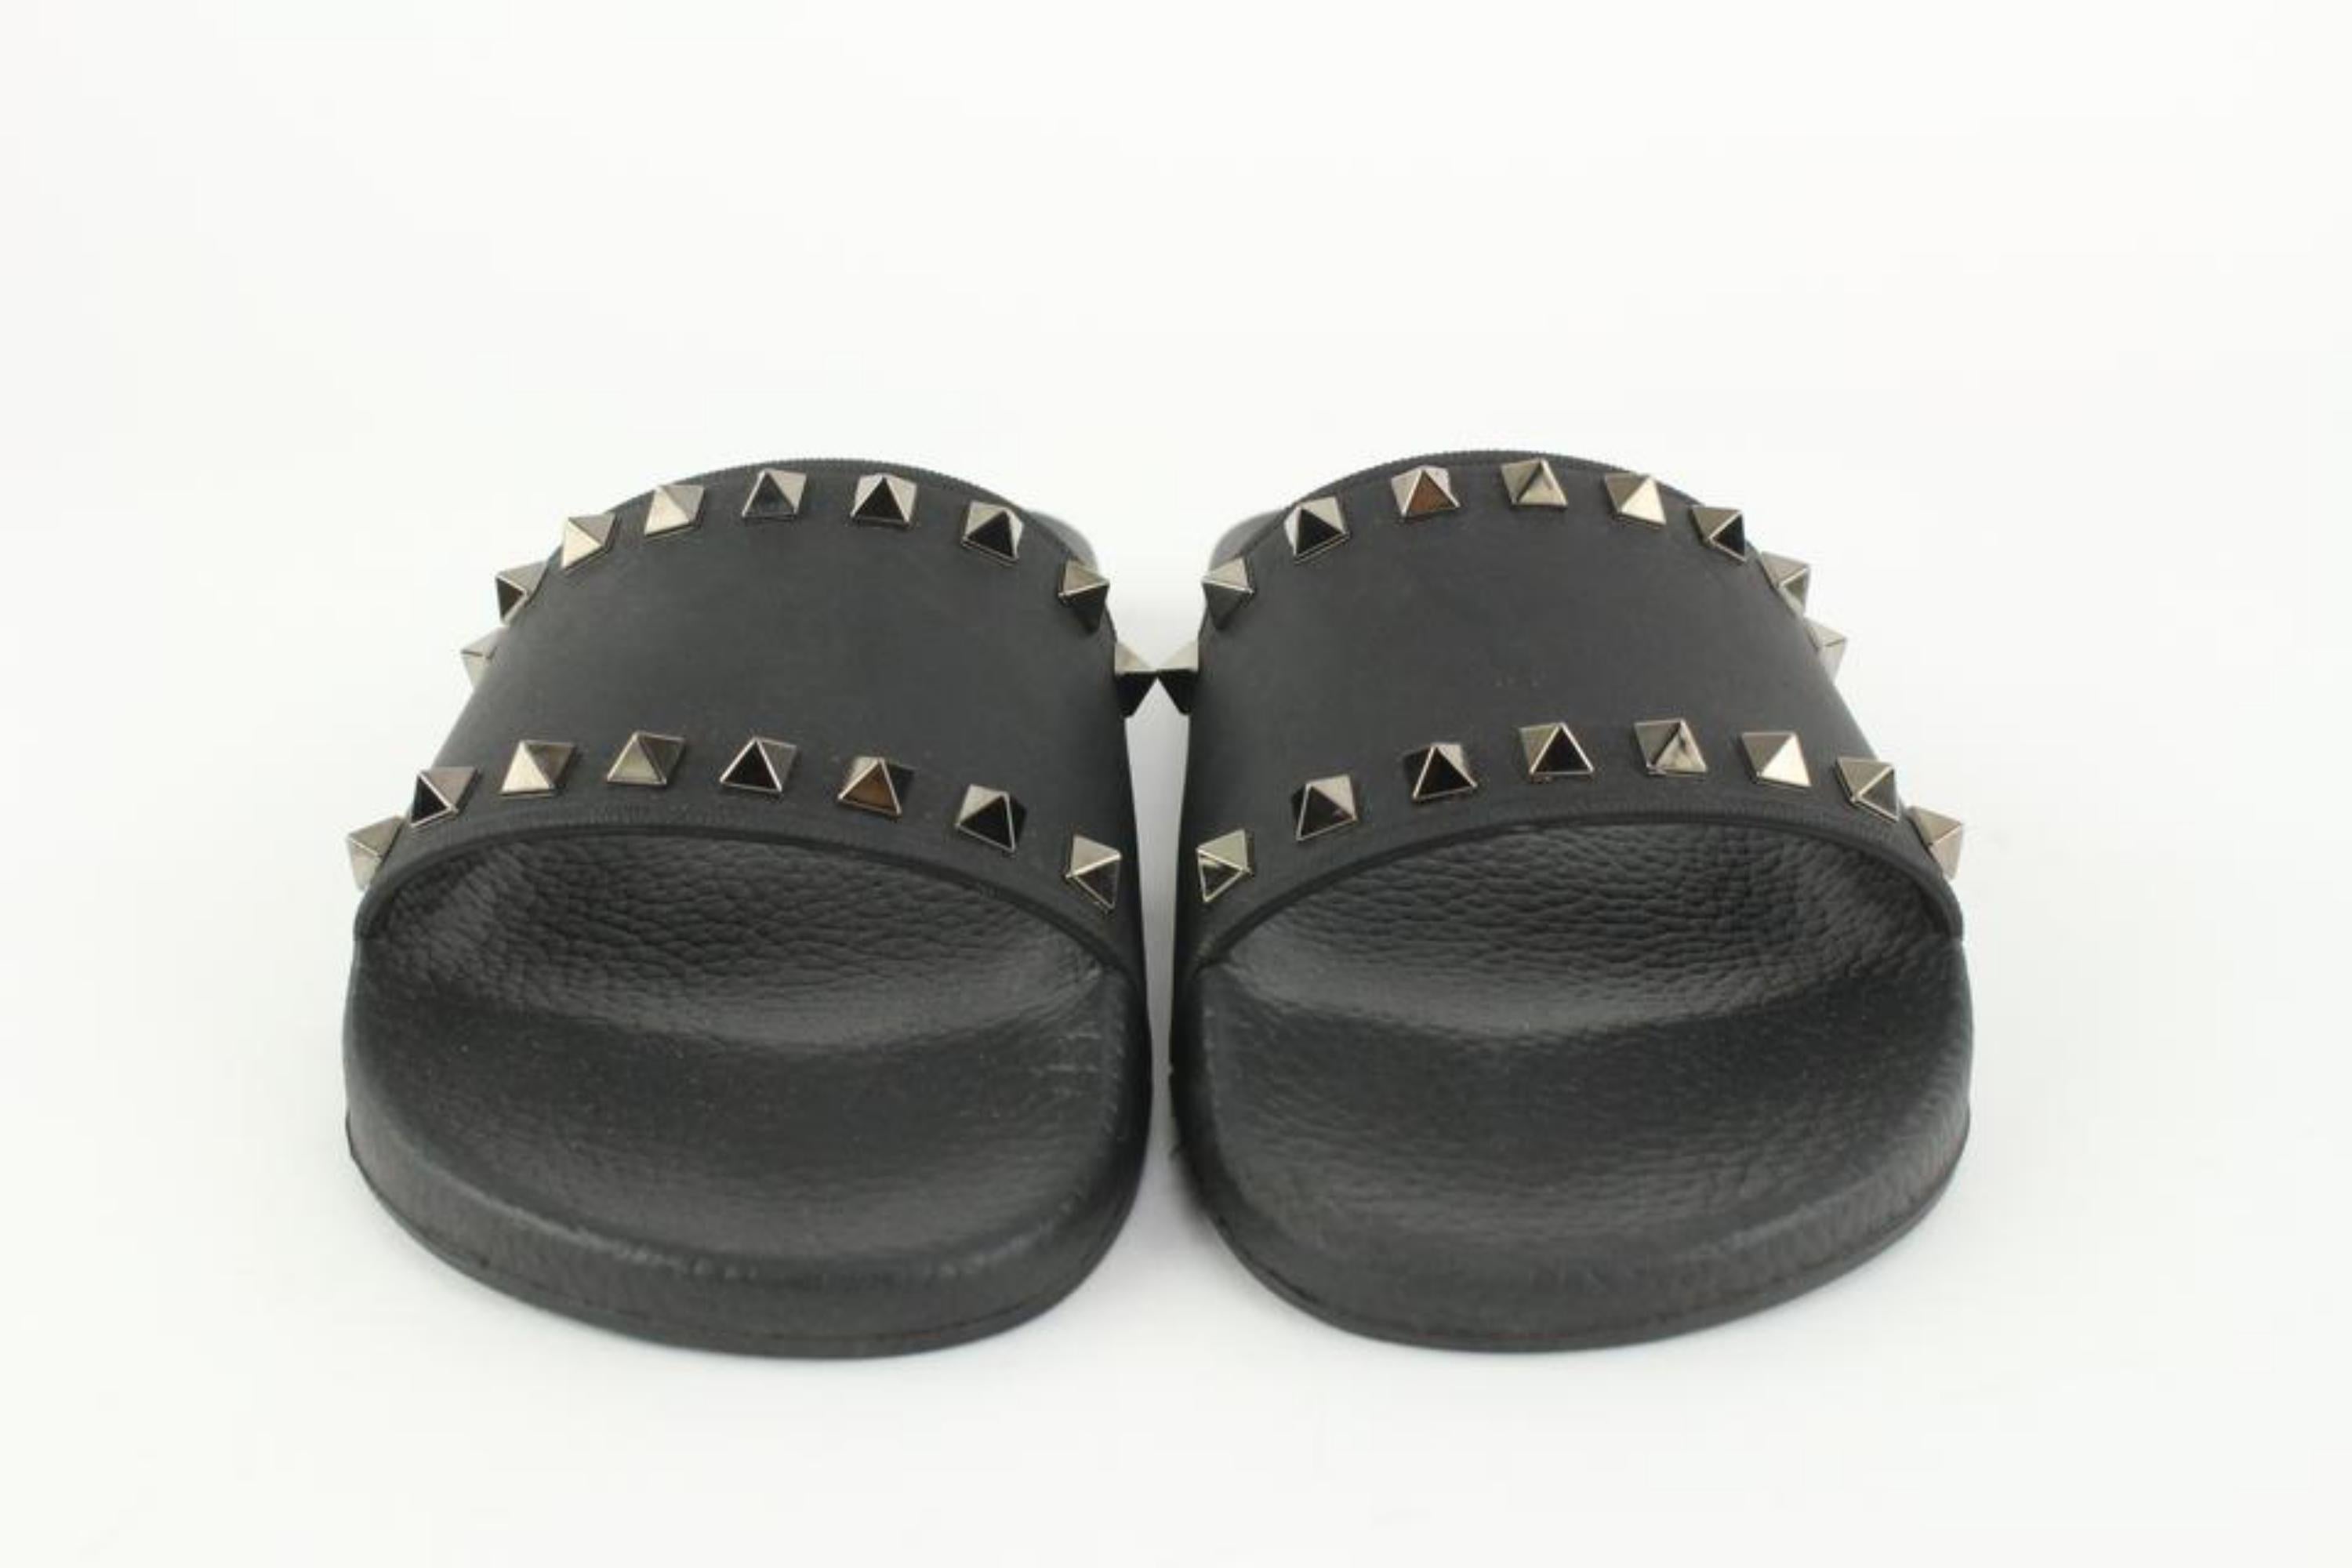 Valentino Women's 38 Black Rockstud Rubber Pool Slide Sandal 128v35 In Excellent Condition For Sale In Dix hills, NY